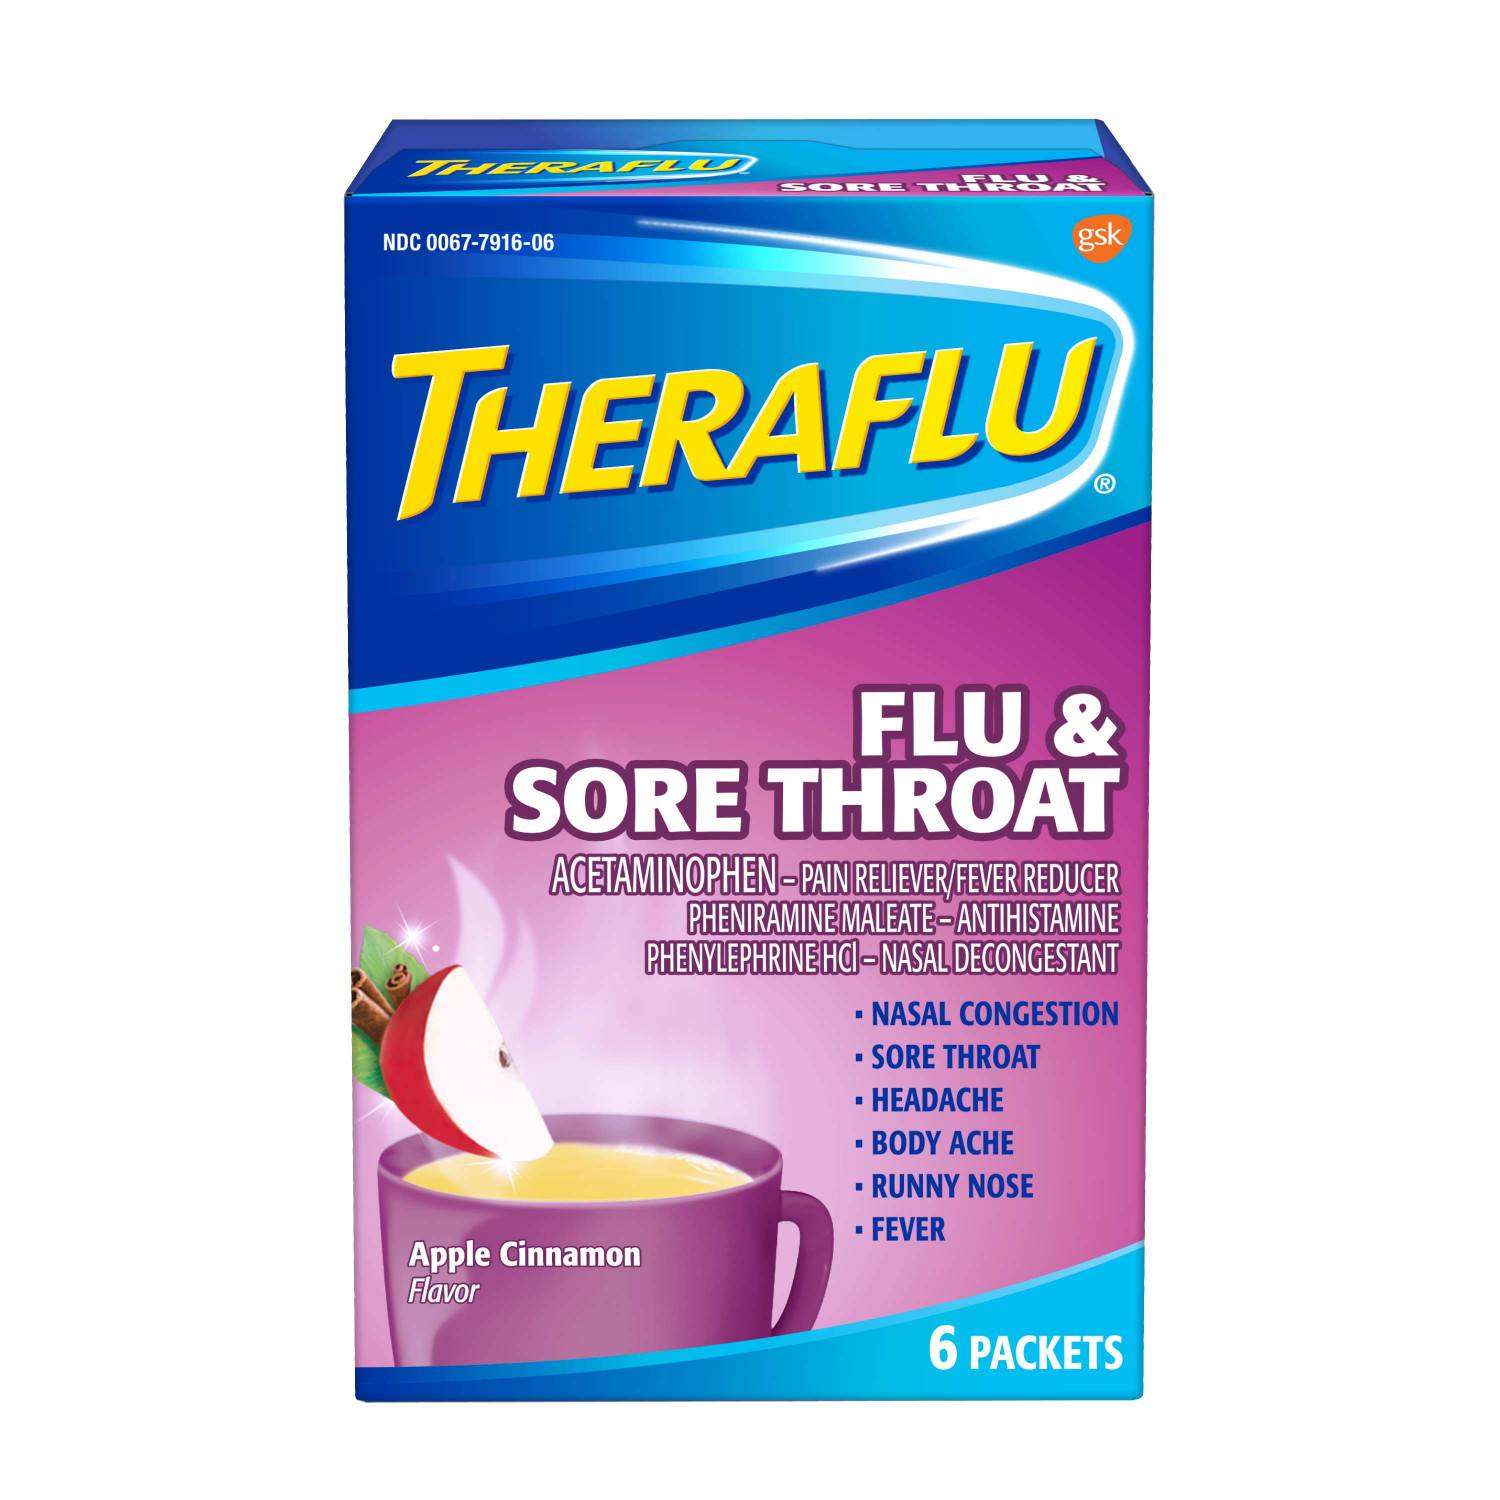 The 8 Best Medicines for a Sore Throat of 2020